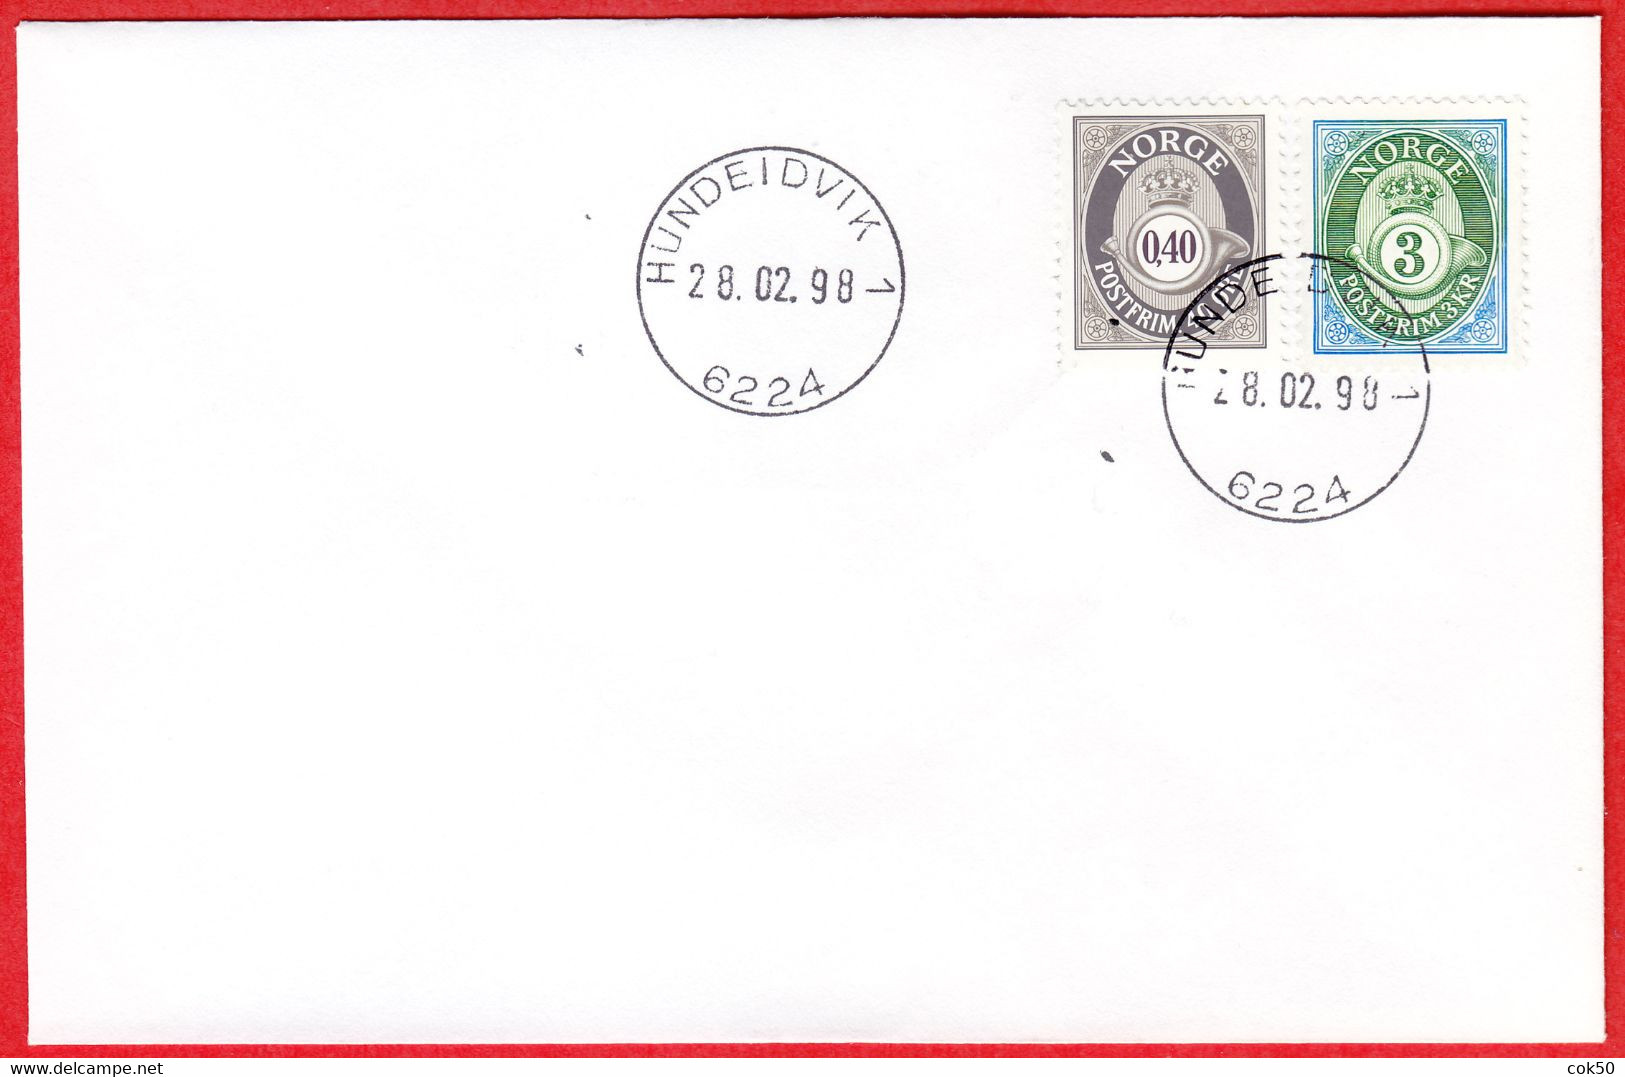 NORWAY -  6224 HUNDEIDVIK 1 (Møre & Romsdal County) - Last Day/postoffice Closed On 1998.02.28 - Local Post Stamps